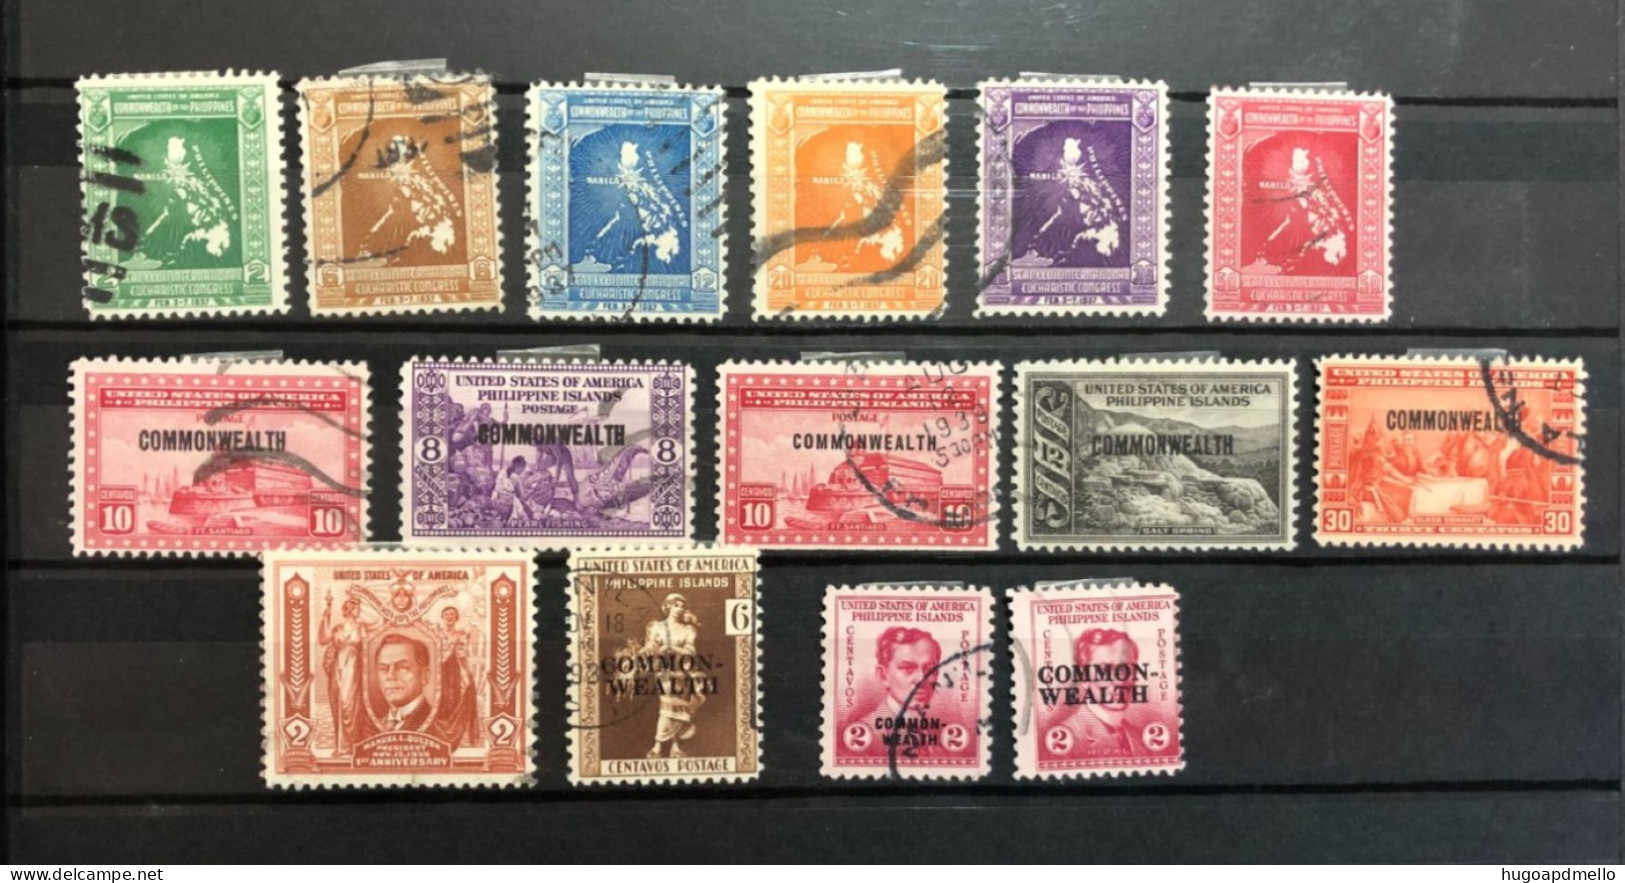 PHILIPPINES Islands (United States Possession & Commonwealth ), Lot Composed Of 15 Old Stamps. USED - Philippinen